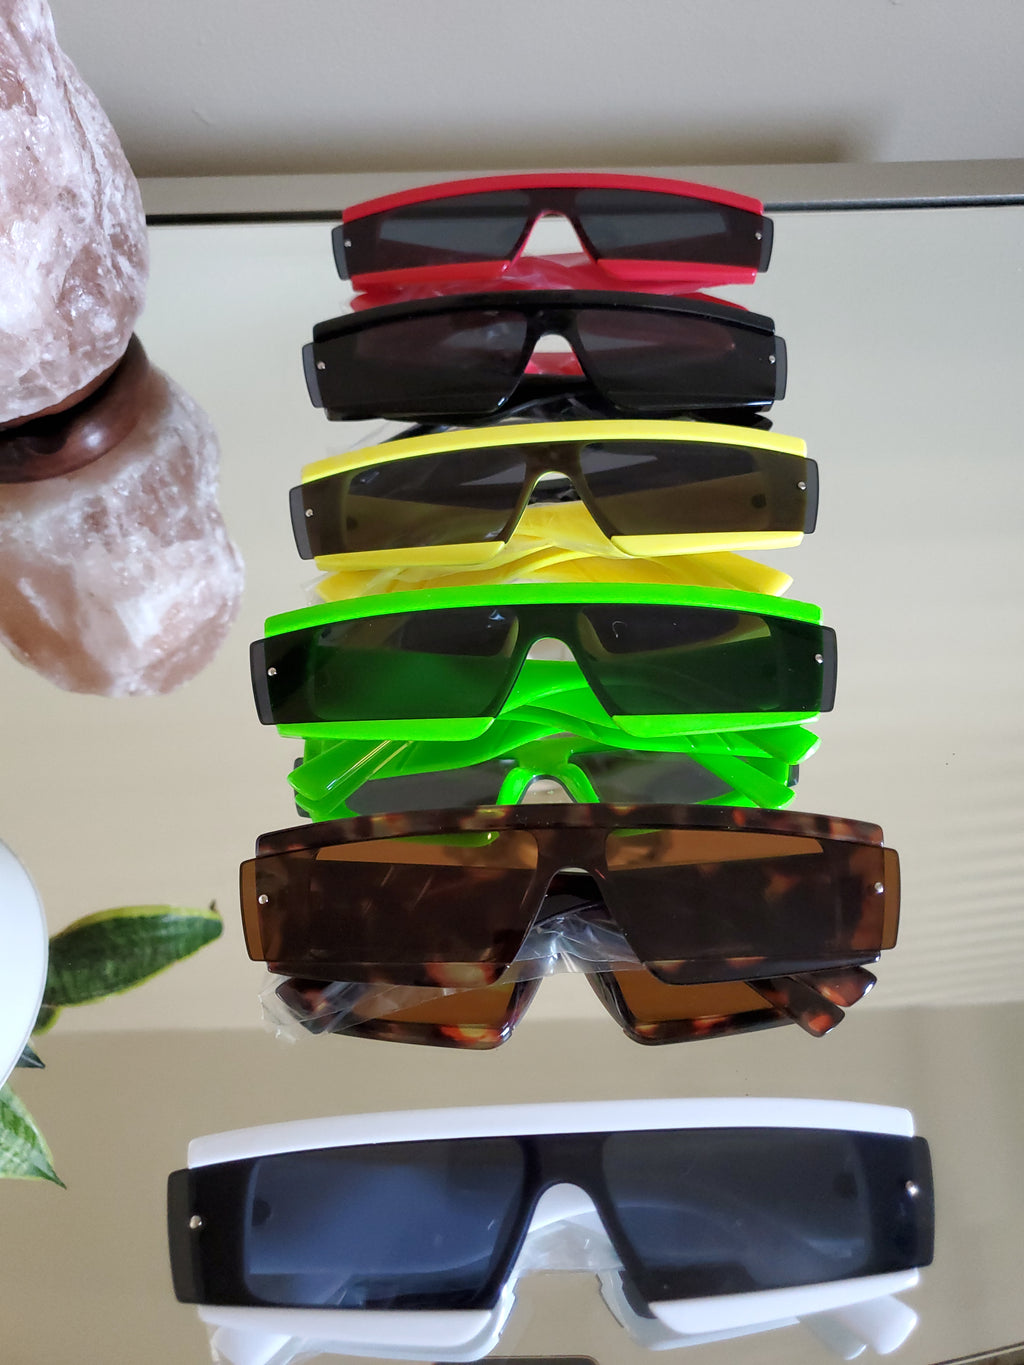 Ali sunglasses. Look stylish while protecting your eyes from the sun. Available in 6 colors